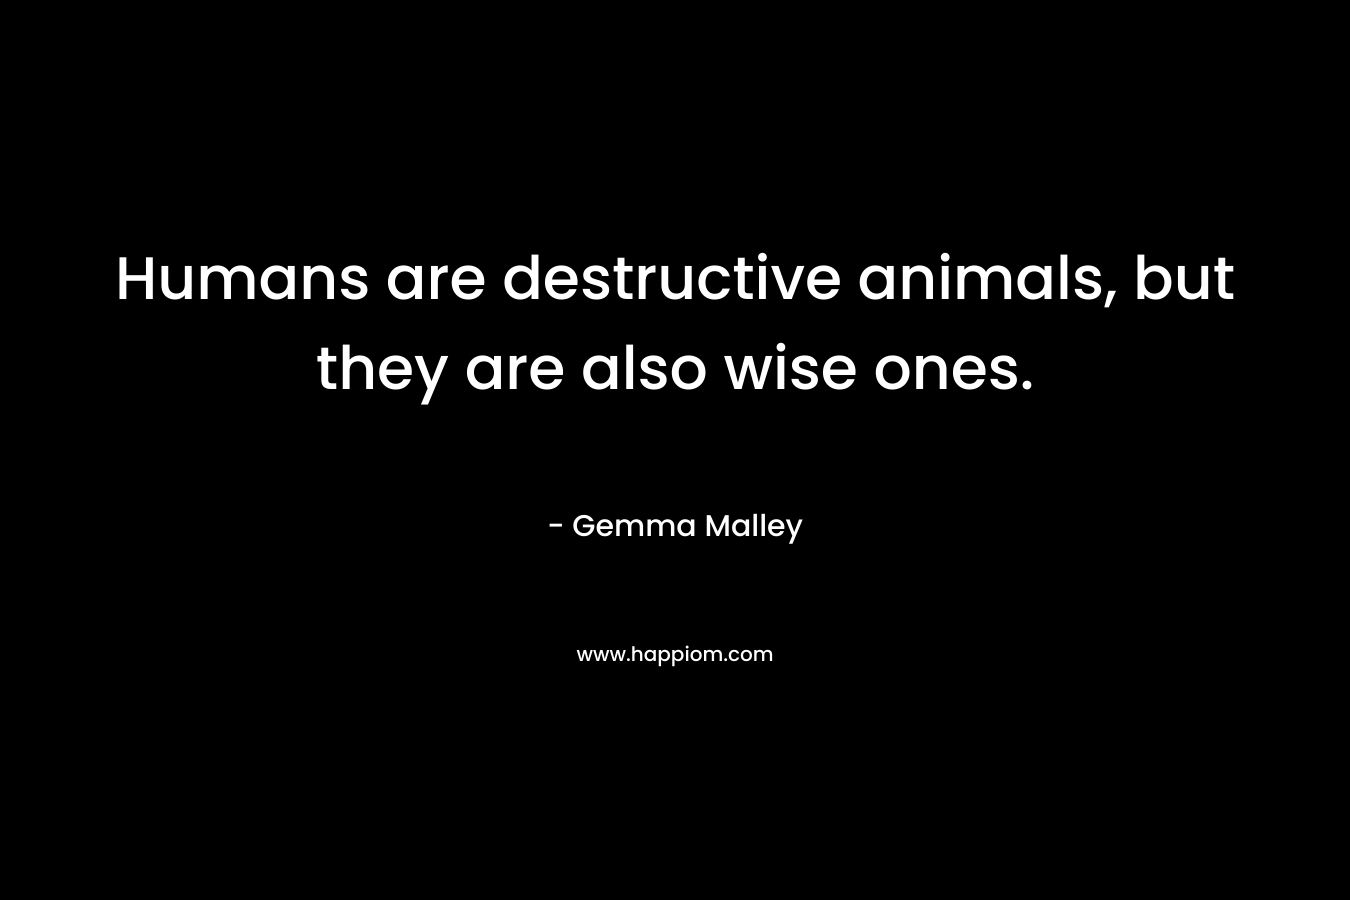 Humans are destructive animals, but they are also wise ones. – Gemma Malley